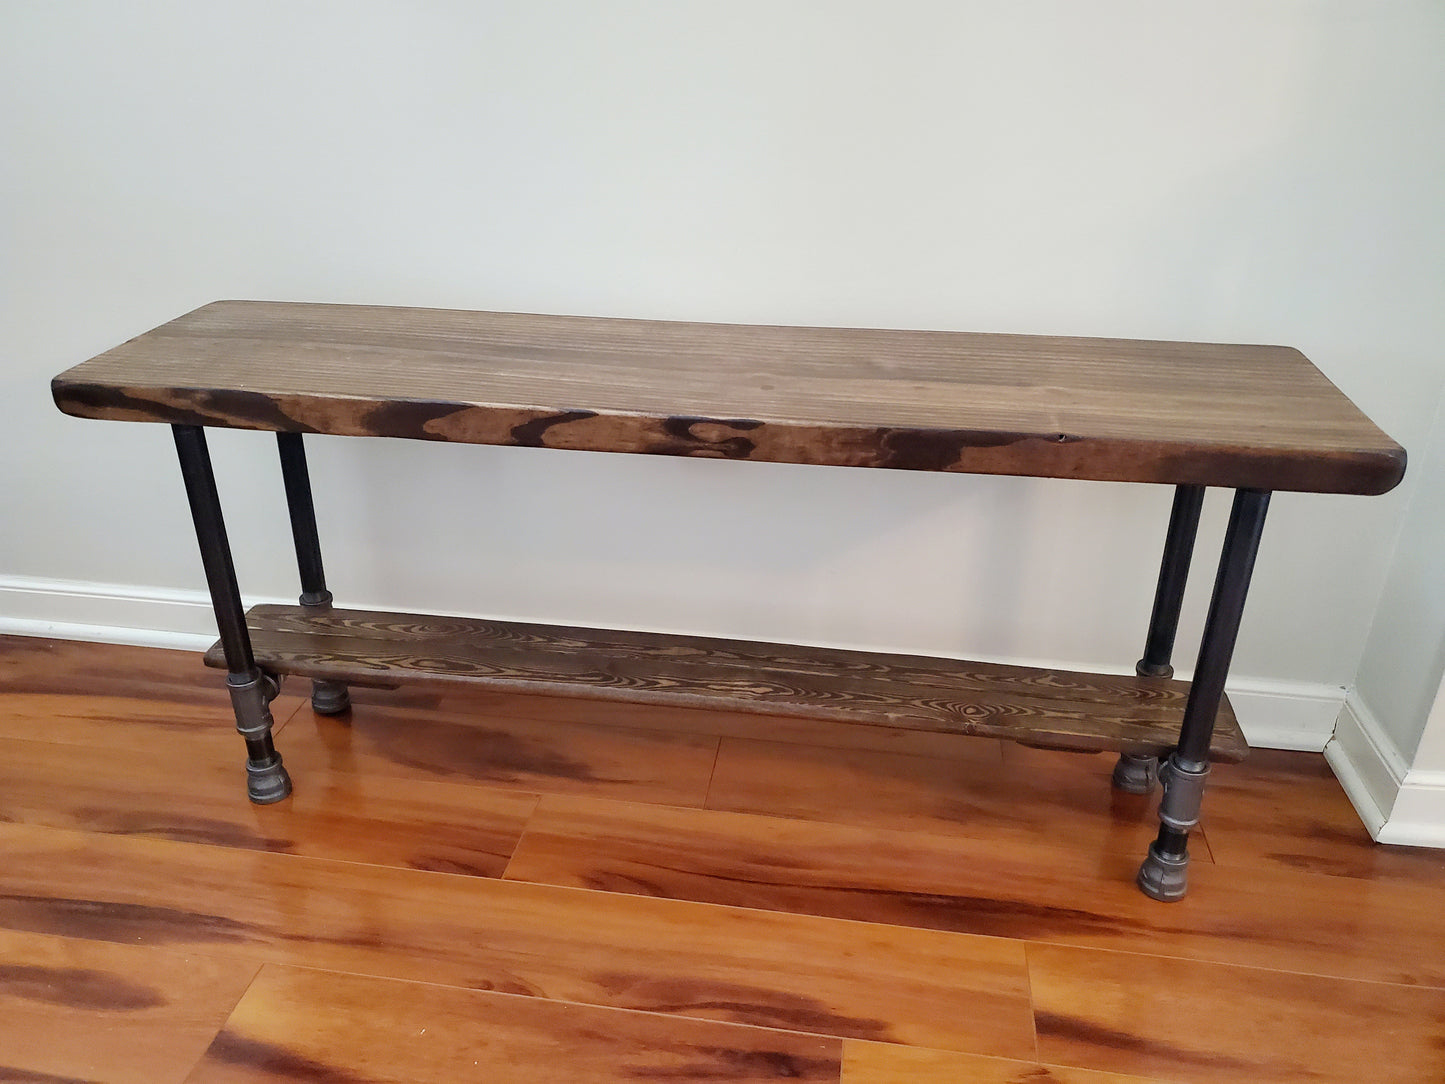 Steel and Pine Wood Bench